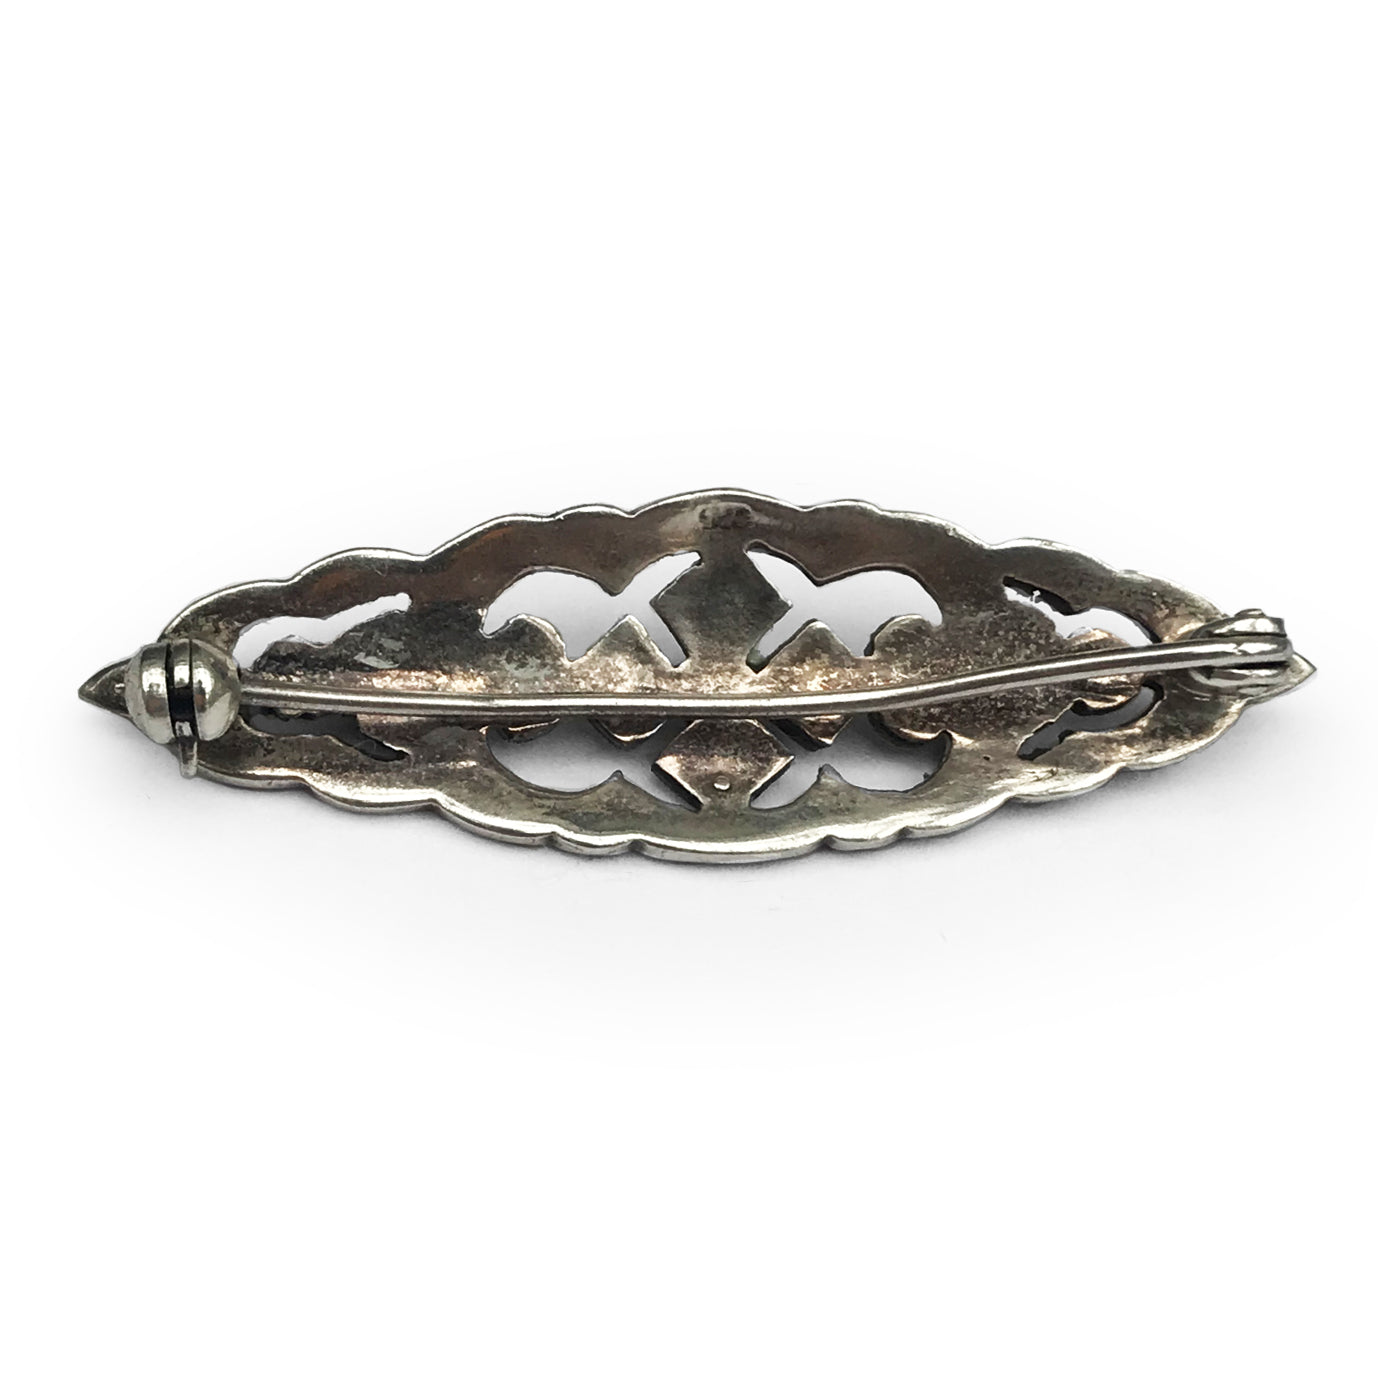 Stirling Silver marcasite brooch - SHOP NOW - www.intovintage.co.uk